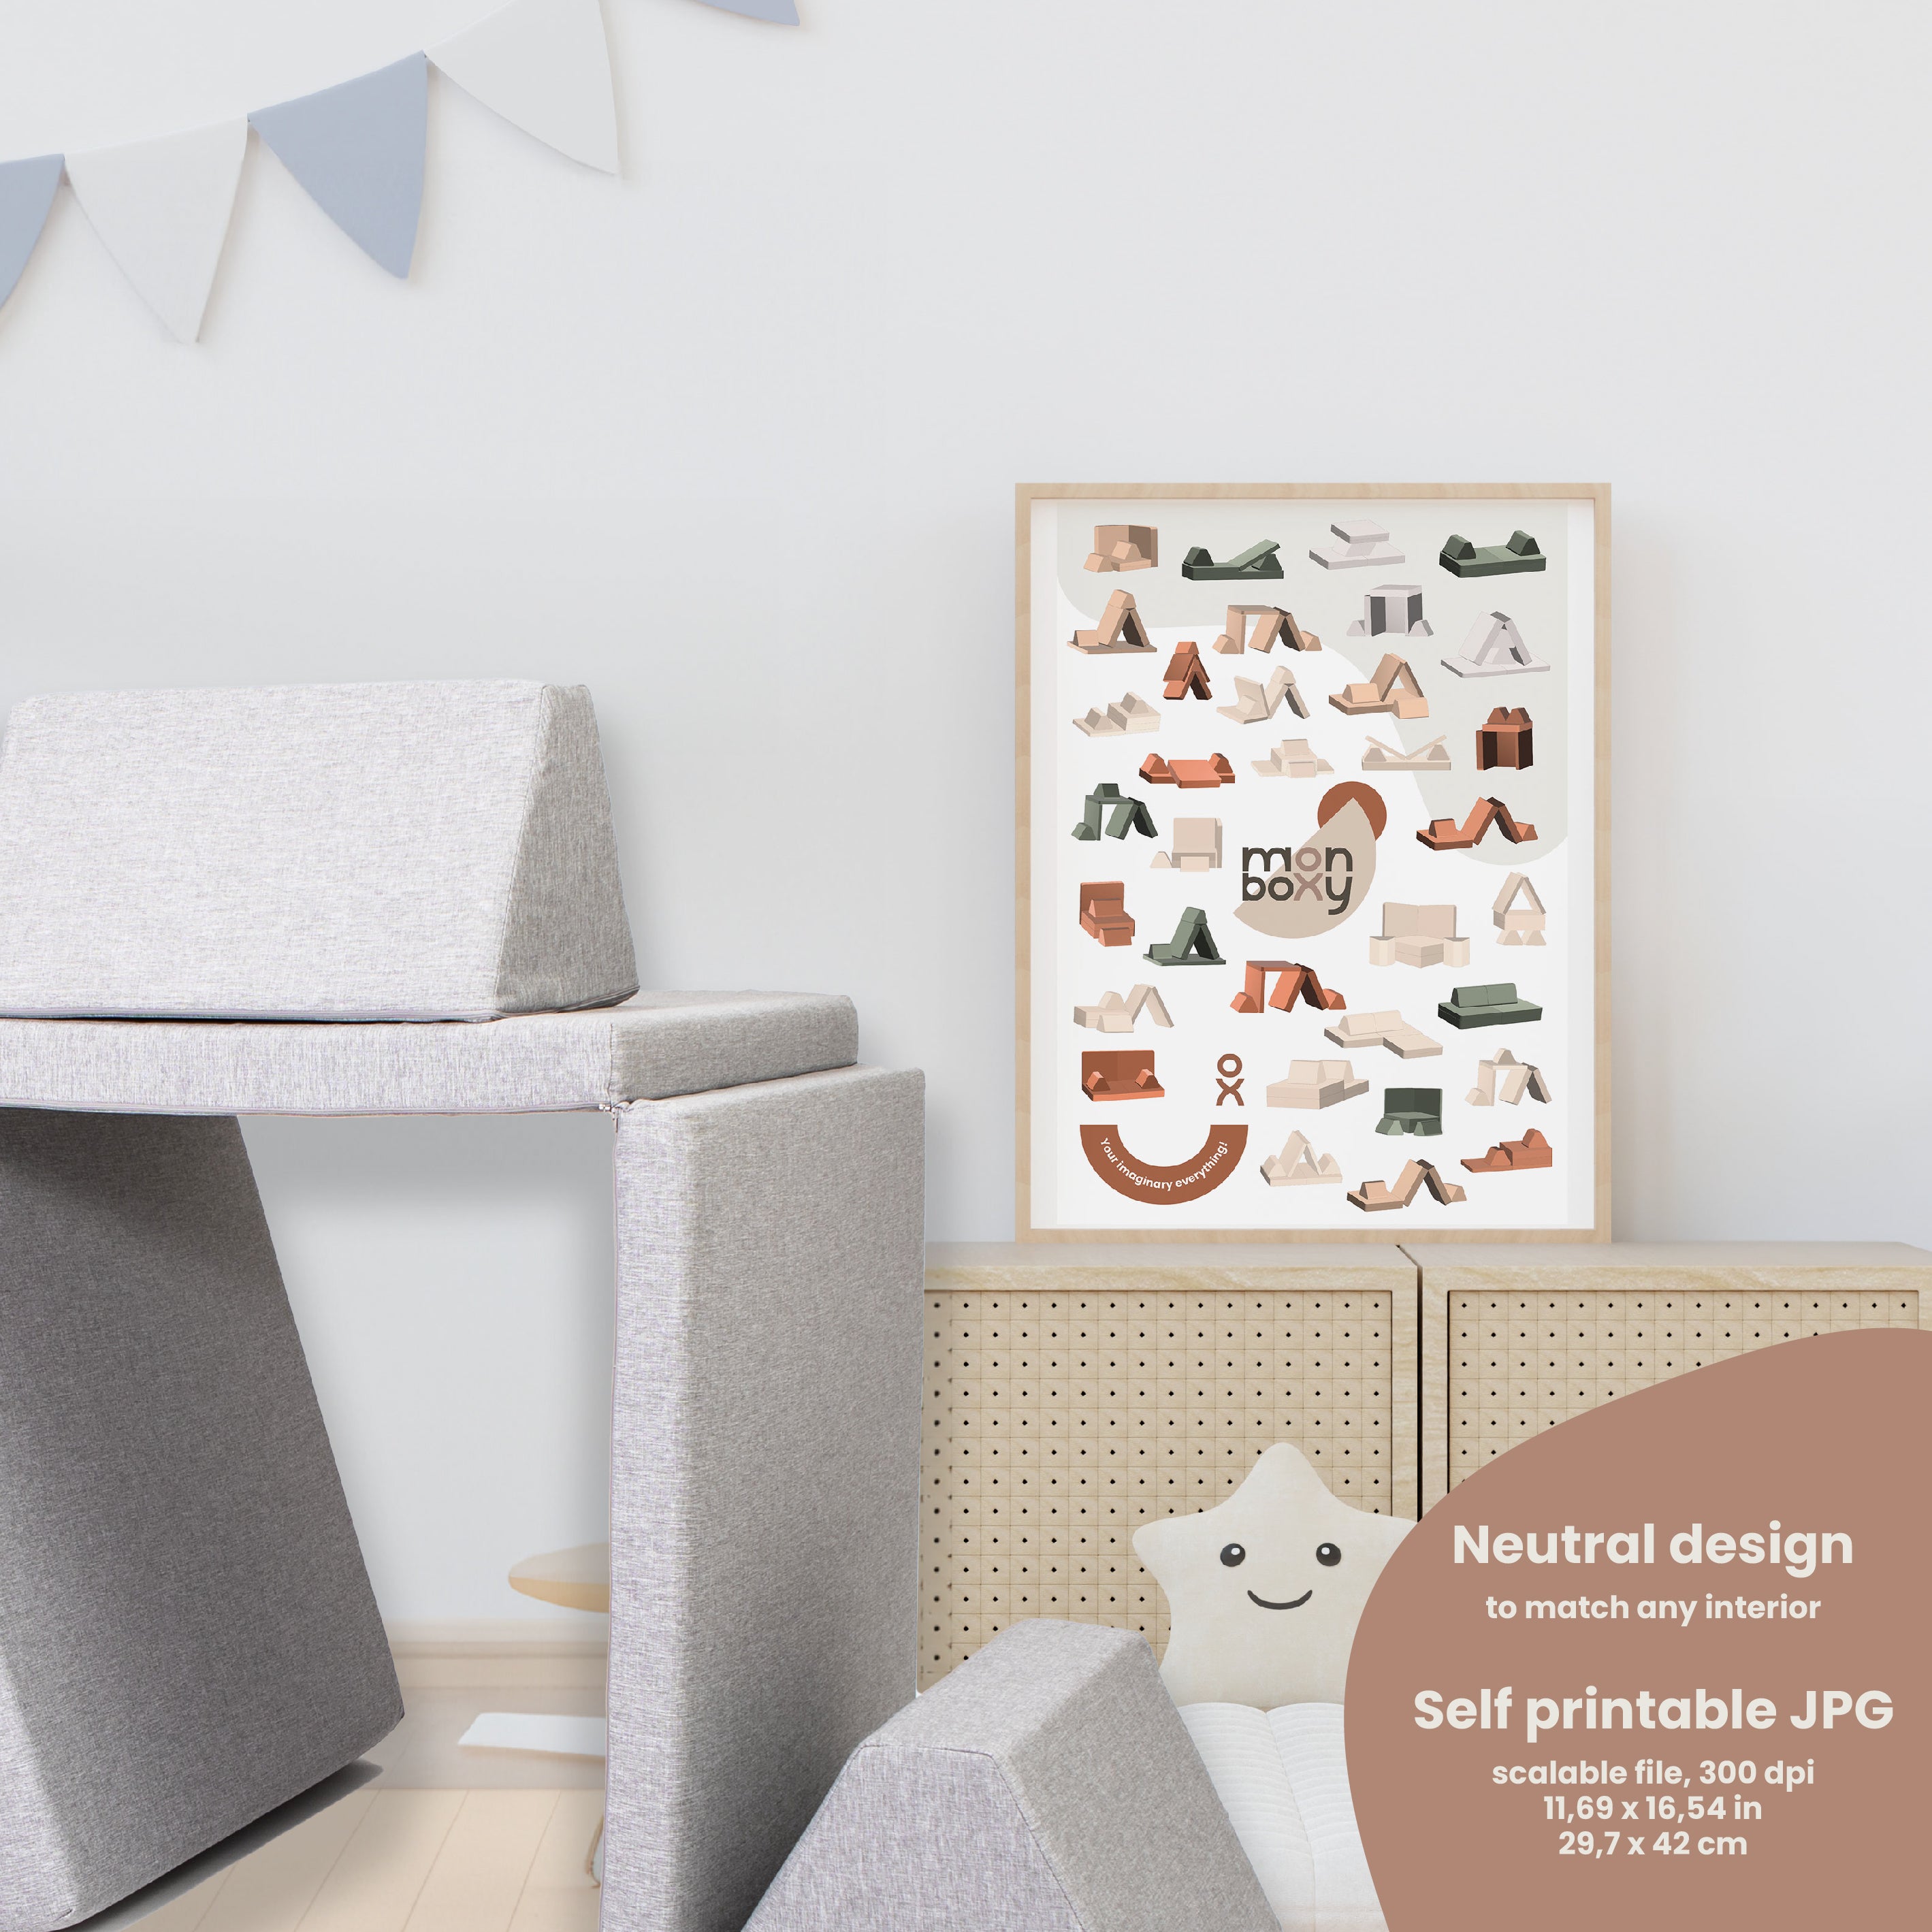 A child's room with a Sweet HOME from wood Activity sofa build ideas poster - Muted colors | digital download for kids and a poster of animals.